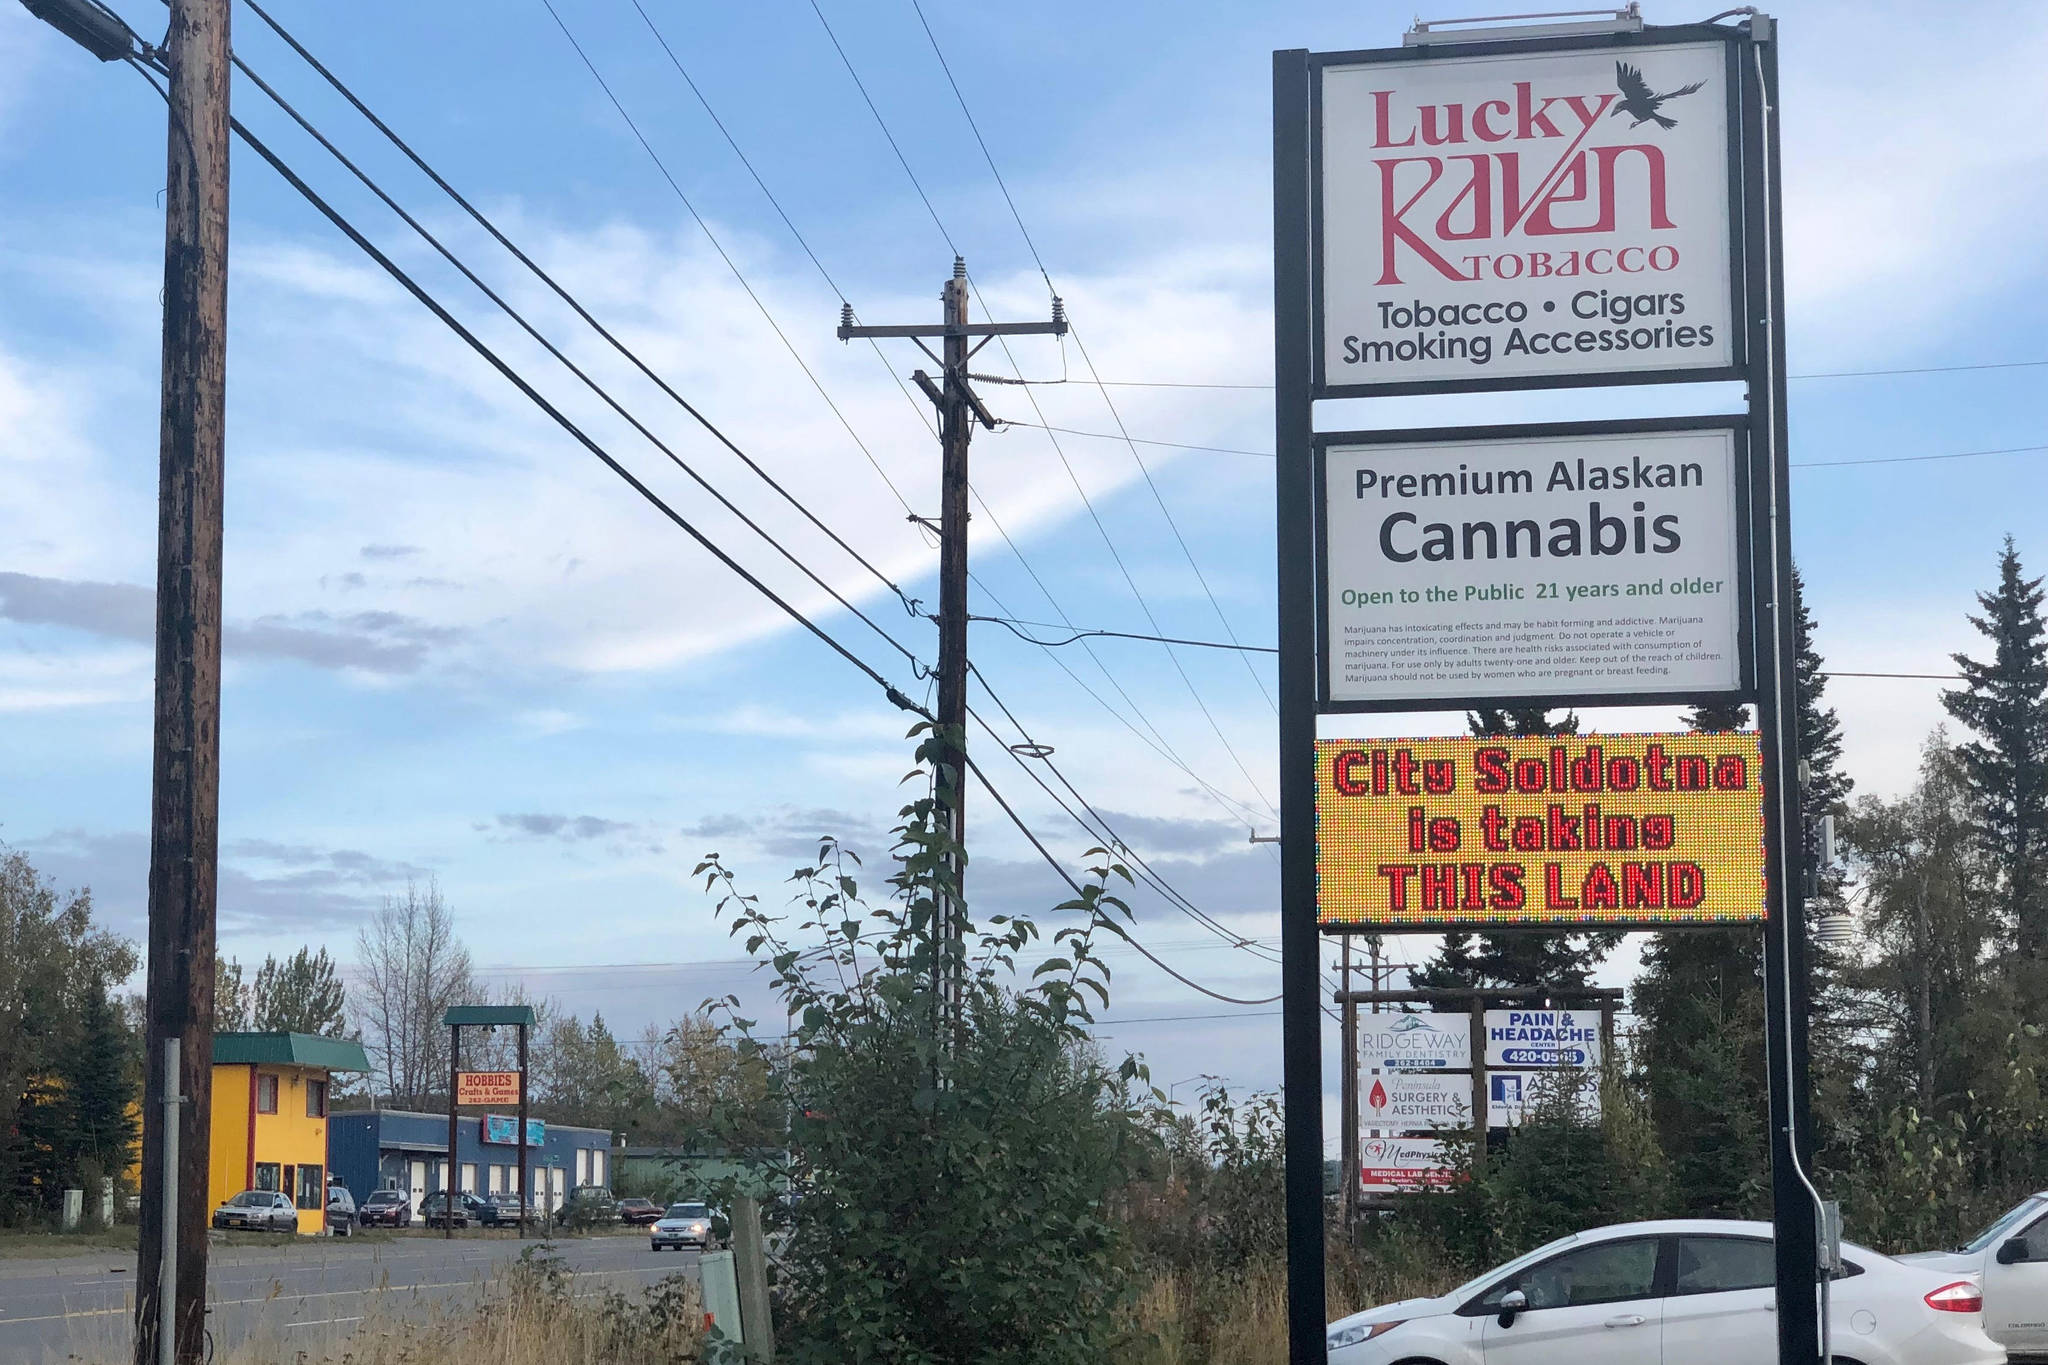 Victoria Petersen / Peninsula Clarion                                 A message opposing annexation is visible on an electronic sign at Lucky Raven Tobacco, located inside one of the proposed areas for annexation near Soldotna on Thursday.